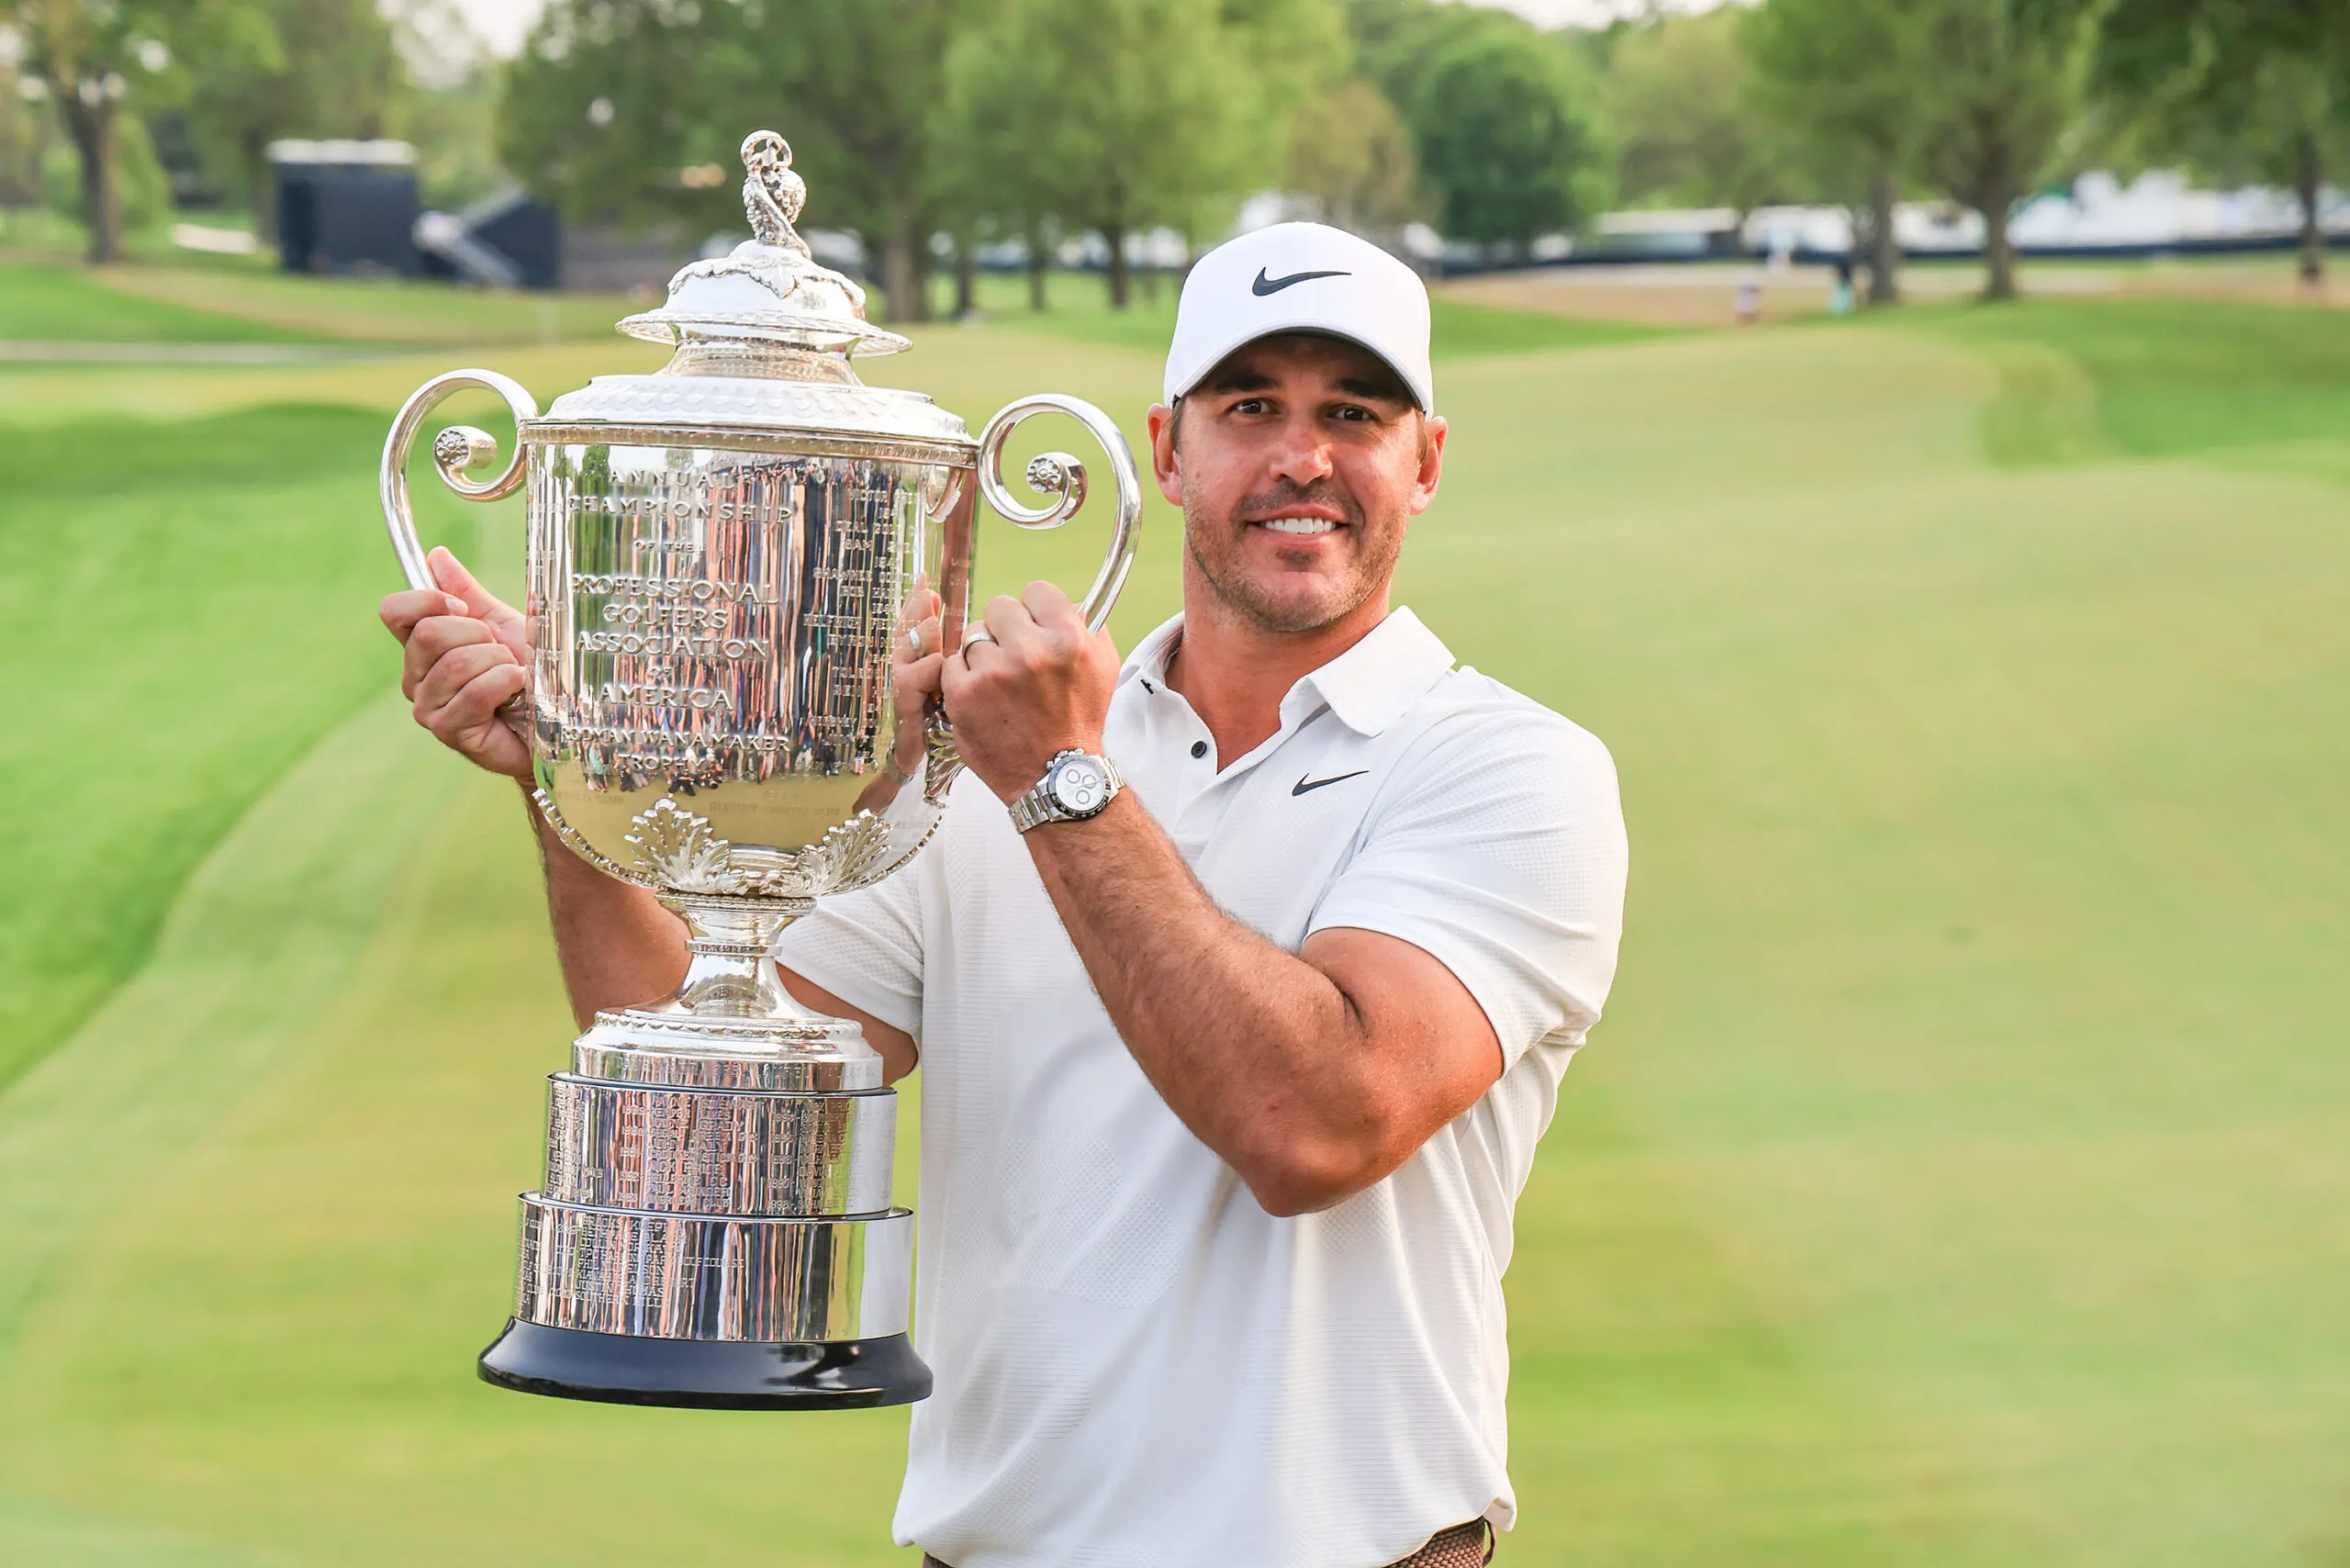 ROCHESTER, NEW YORK - MAY 21: Brooks Koepka of The United States holds the Wanamaker Trophy after his win the final round of the 2023 PGA Championship at Oak Hill Country Club on May 21, 2023 in Rochester, New York. (Photo by David Cannon/Getty Images)